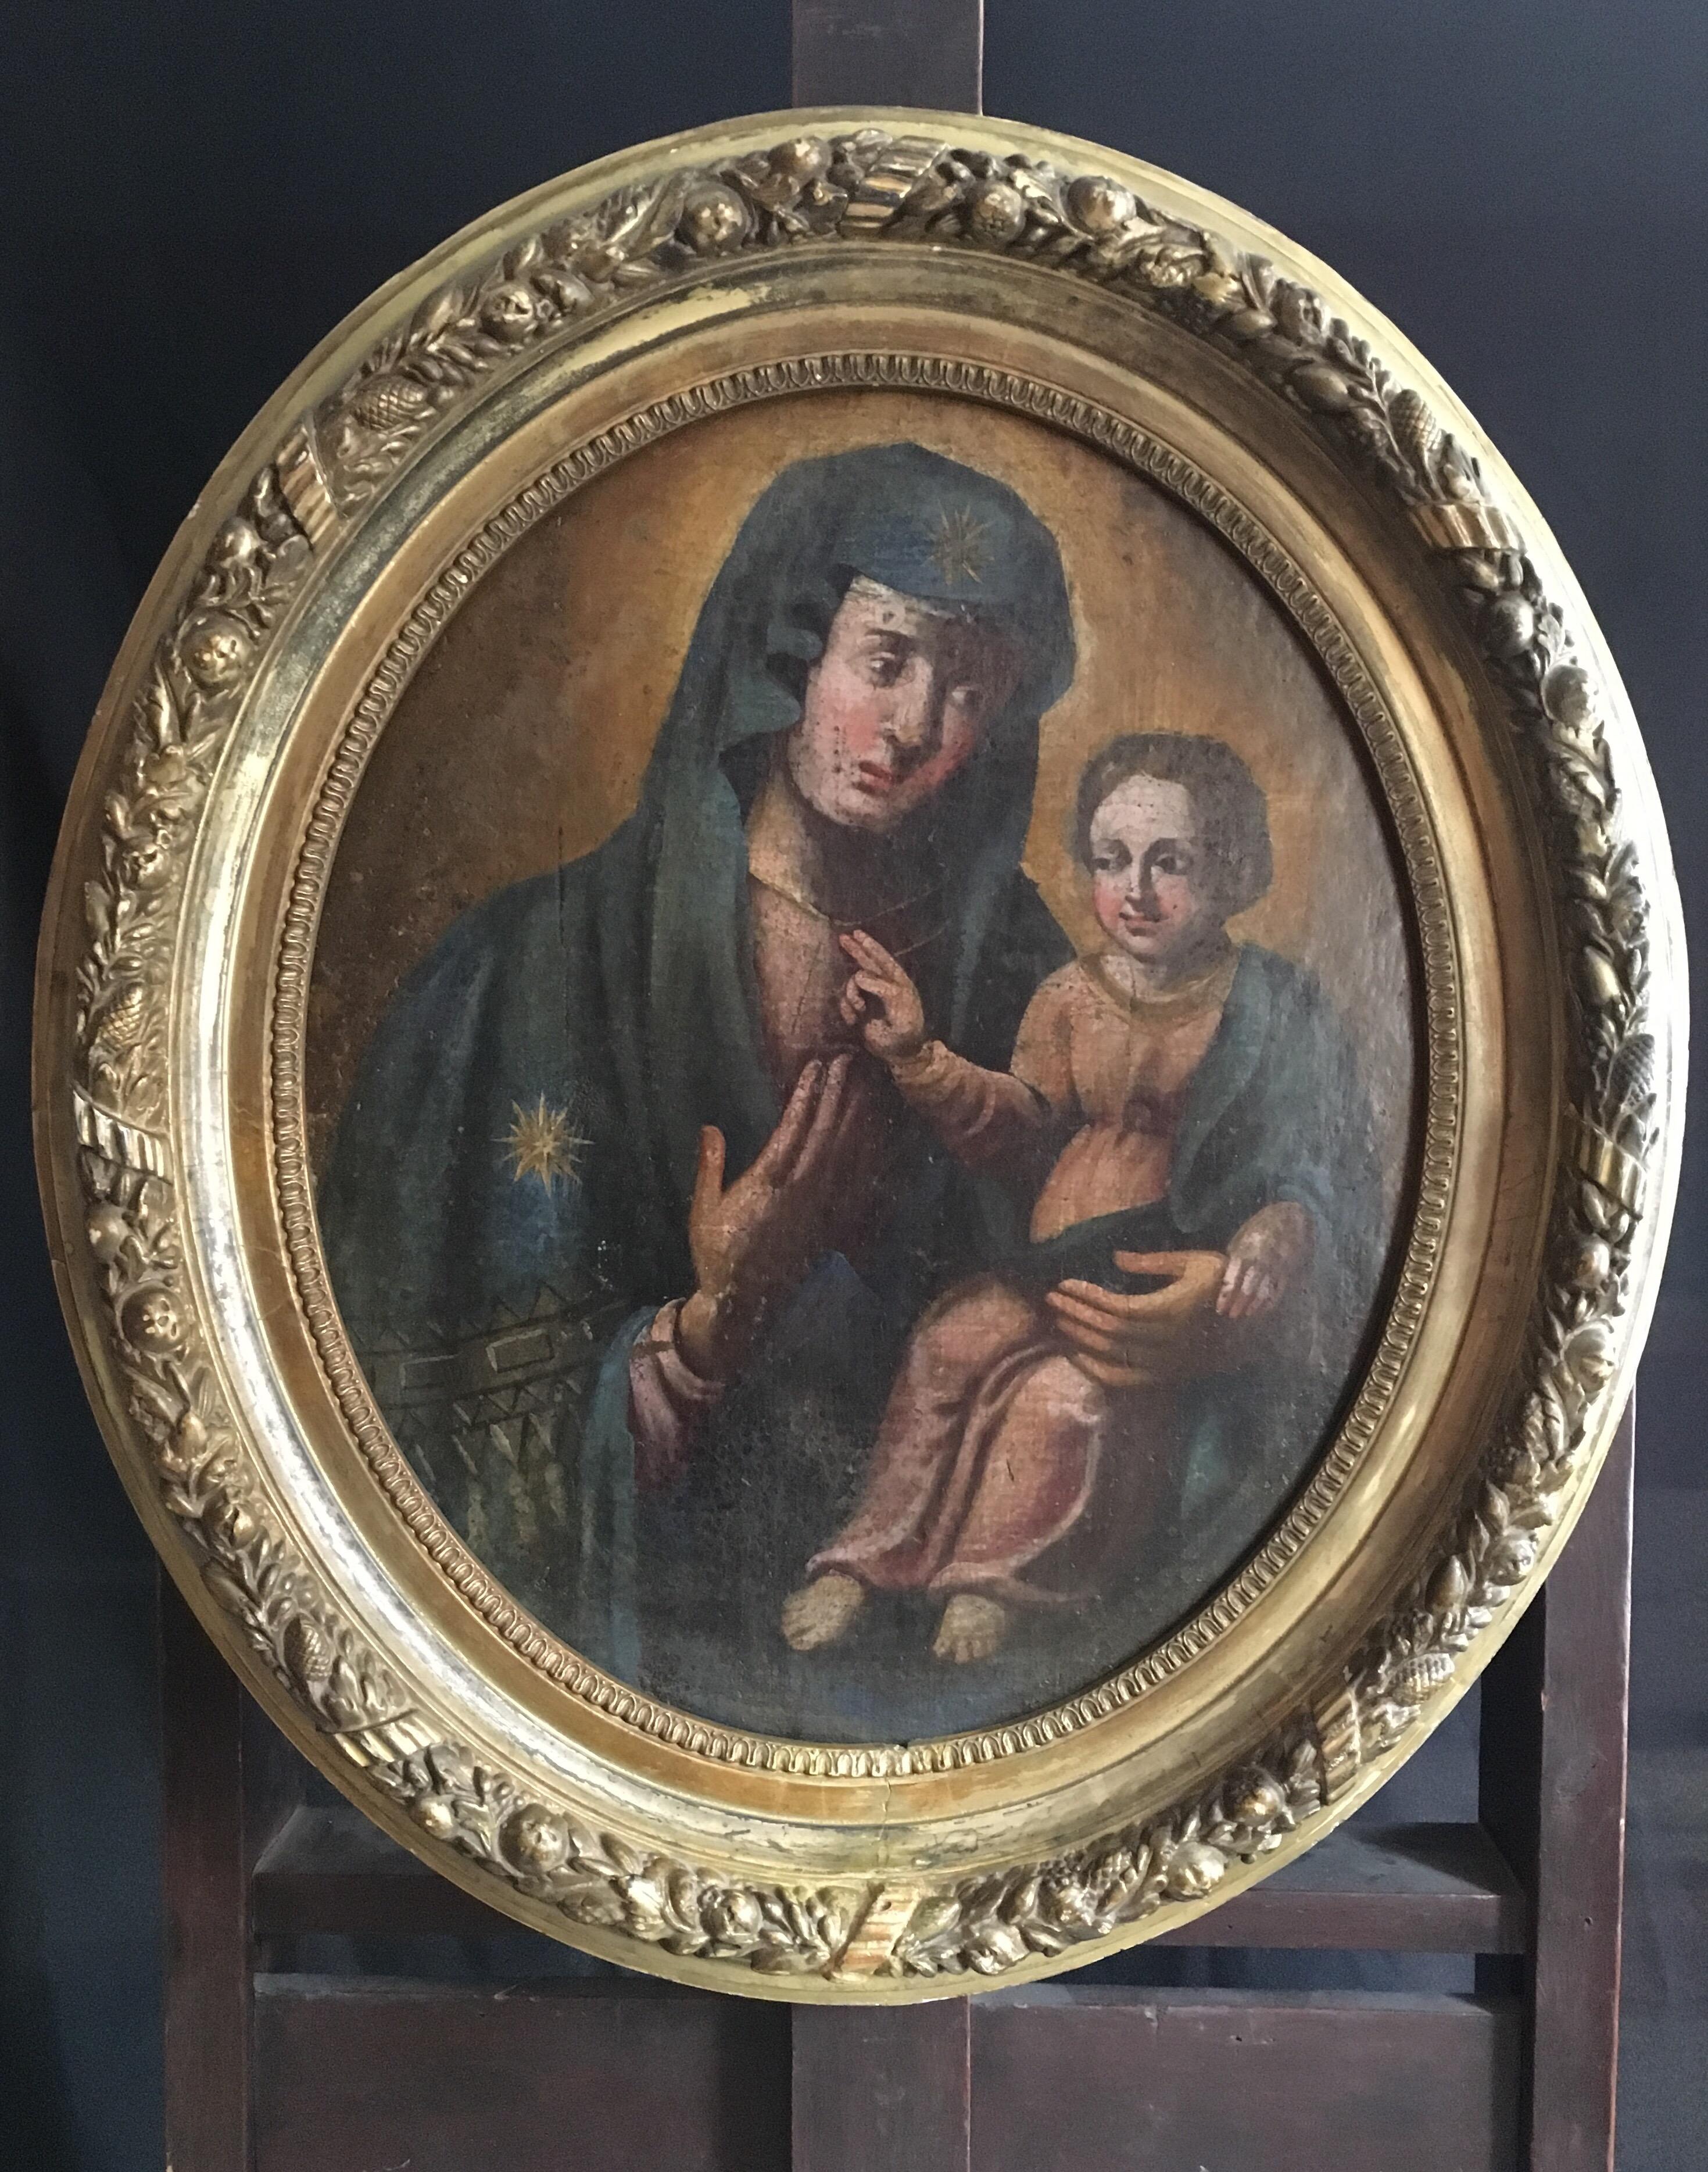 Unknown Figurative Painting - Virgin and Child, 18th Century Portrait of Mary and Jesus, Oval Oil Painting